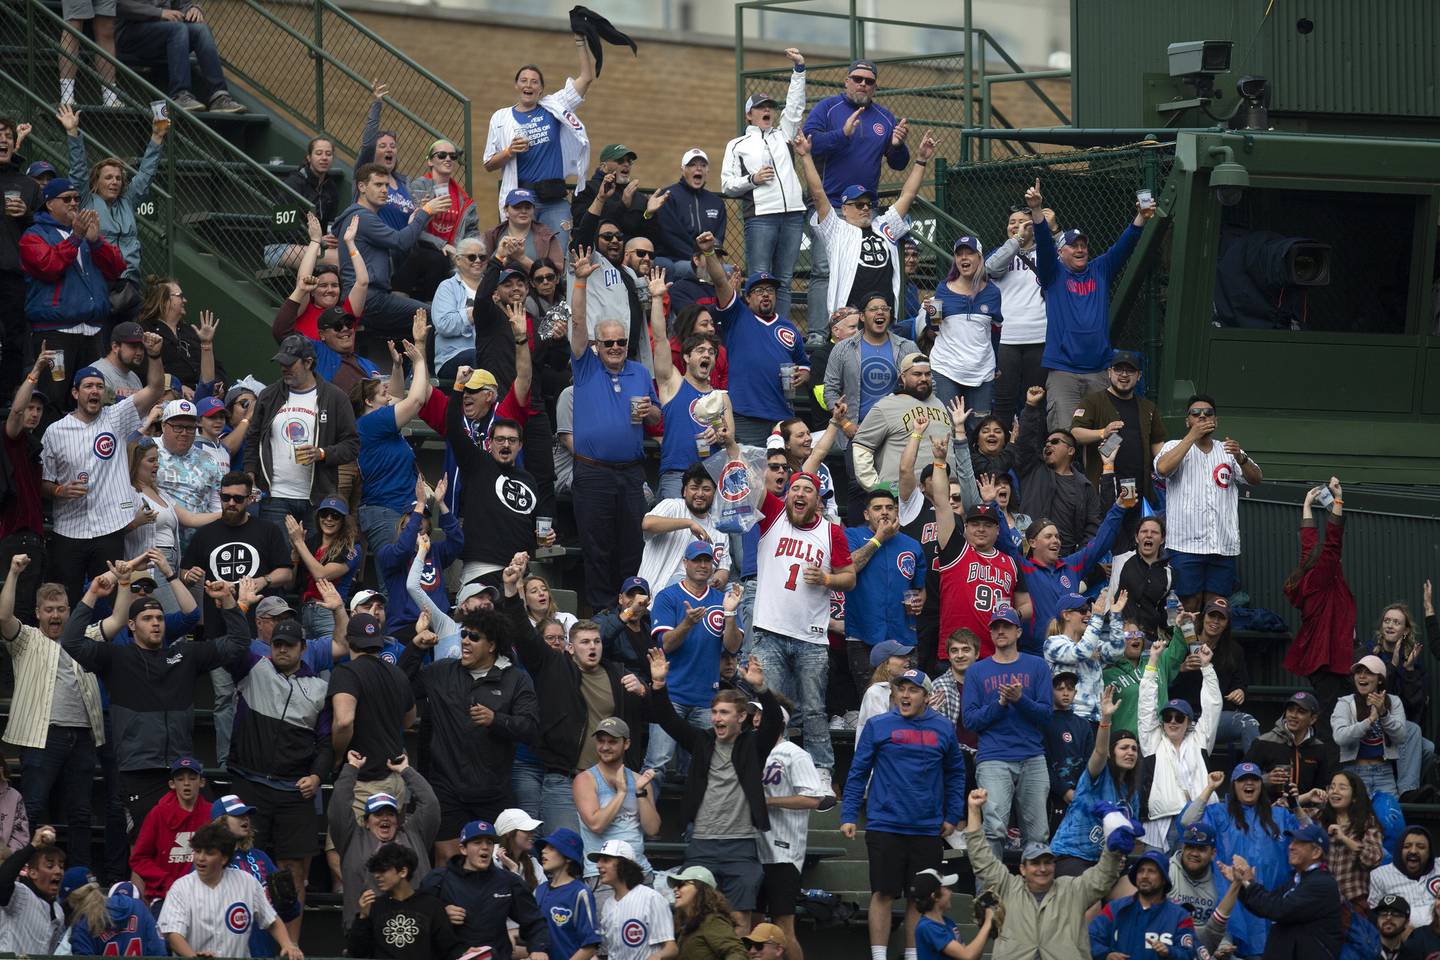 Fans cheer after Cubs center fielder Ian Happ hit a home run against the Pirates on April 24 at Wrigley Field. 